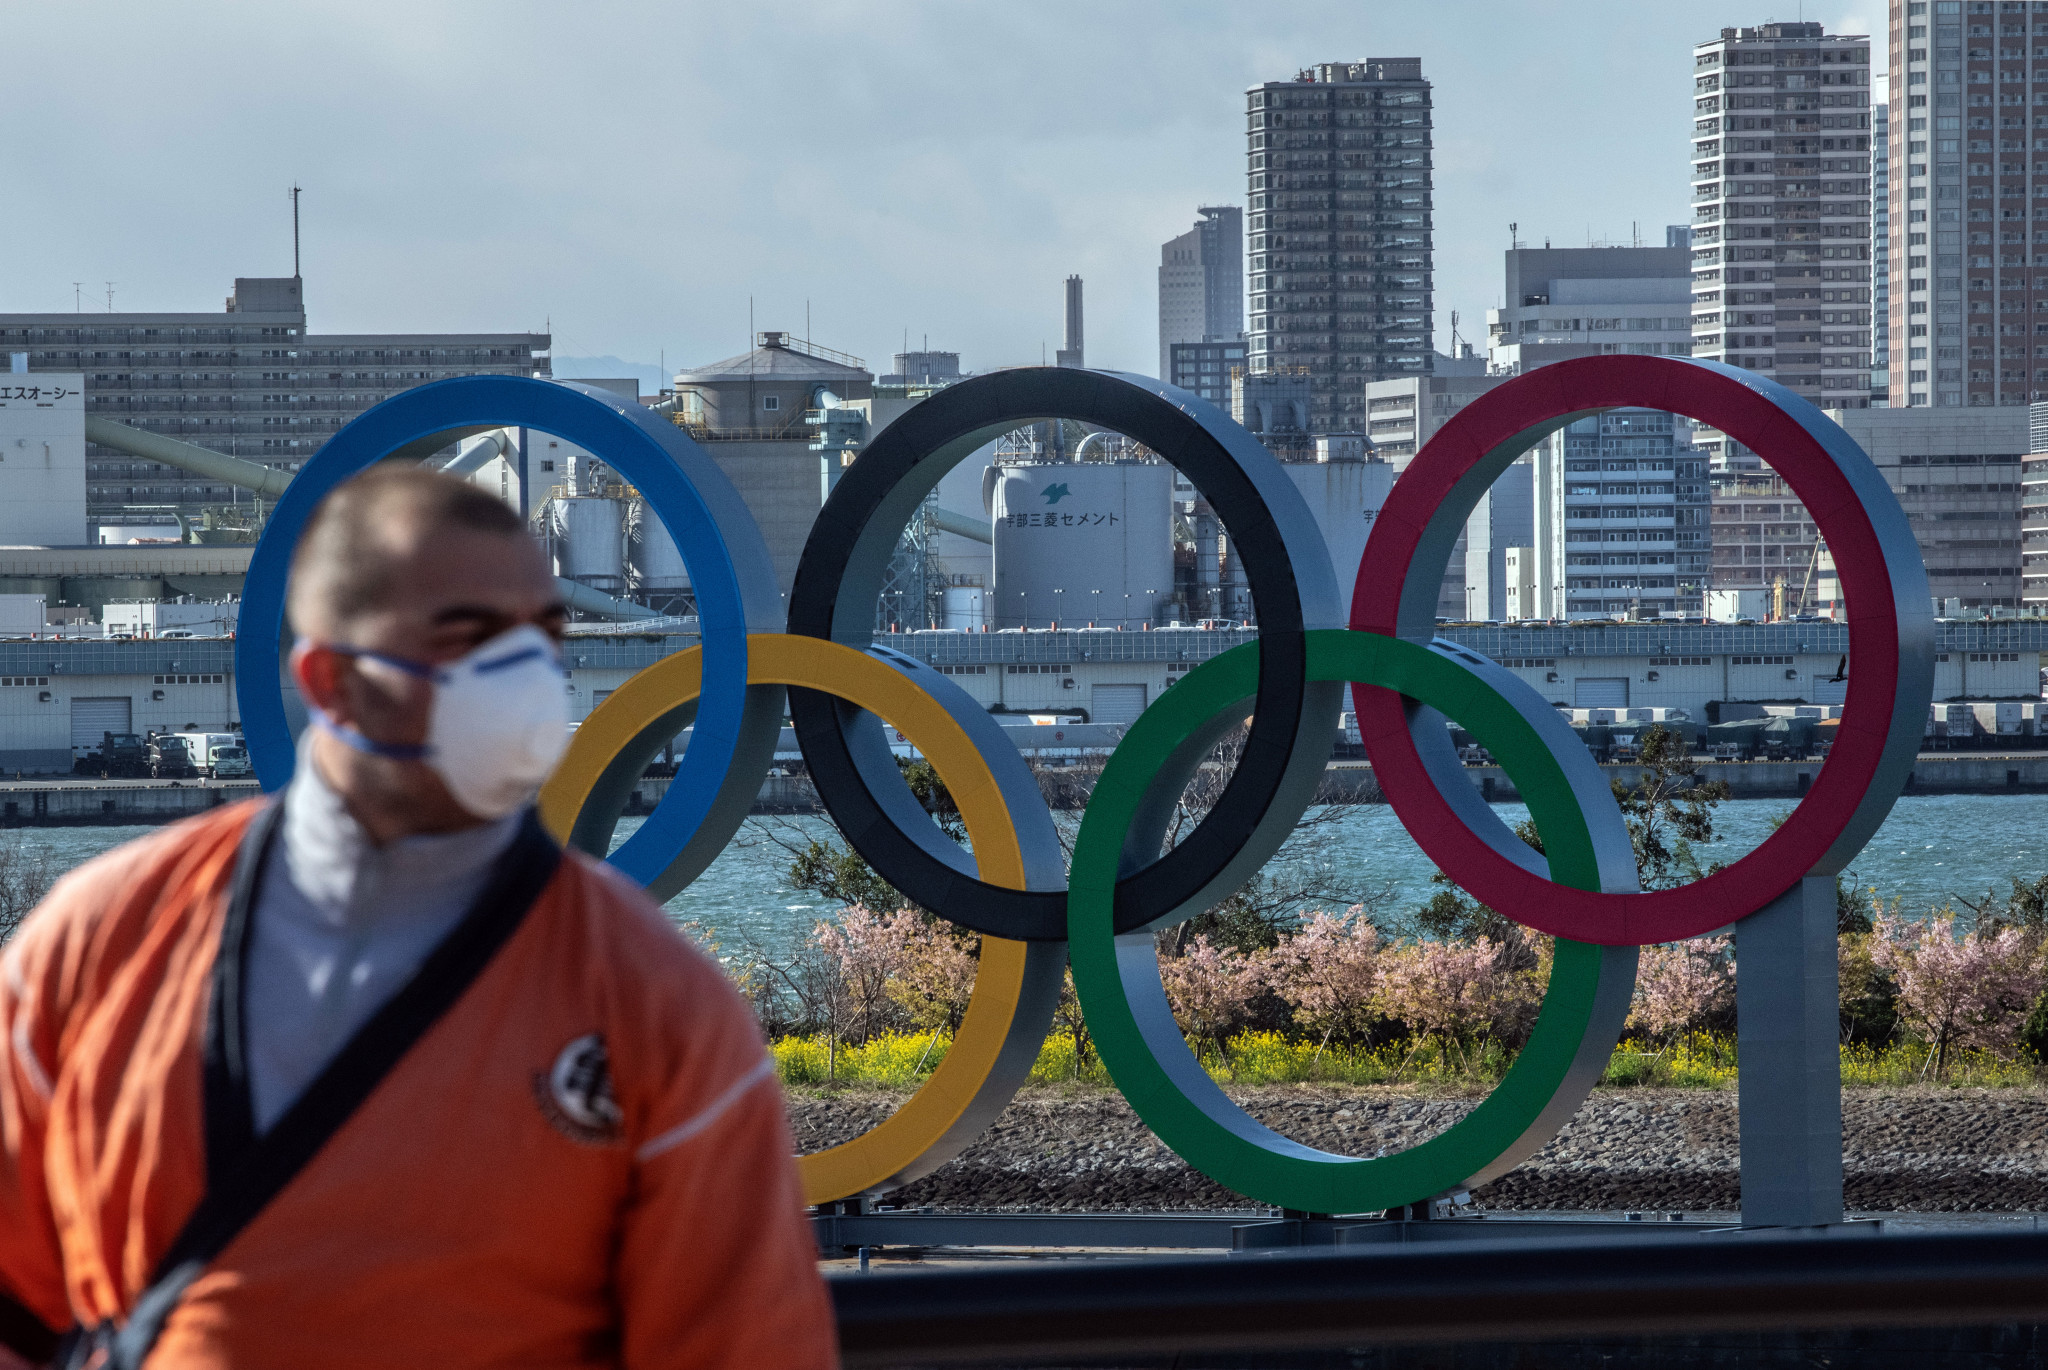 The Tokyo 2020 Olympic and Paralympic Games have been rescheduled due to the coronavirus pandemic ©Getty Images